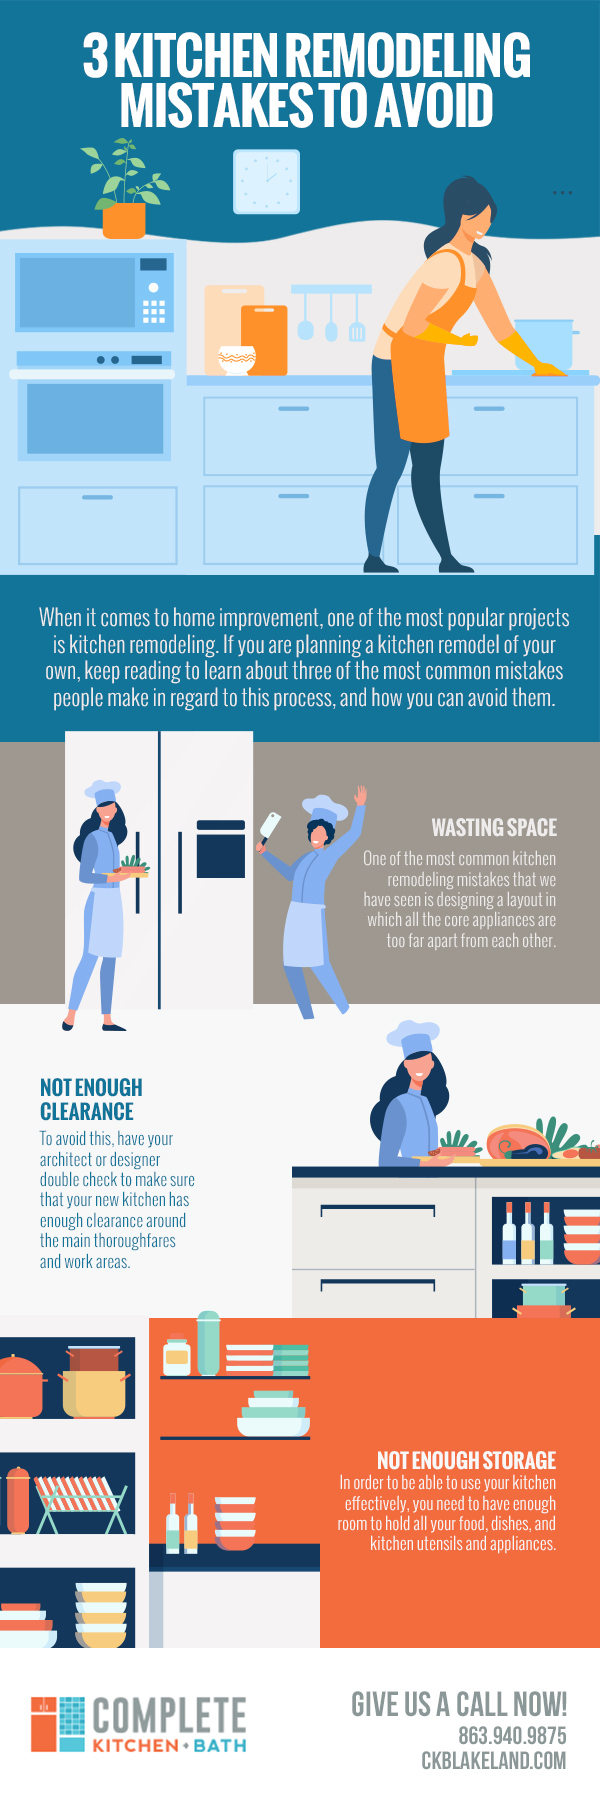 3 Kitchen Remodeling Mistakes to Avoid [infographic]